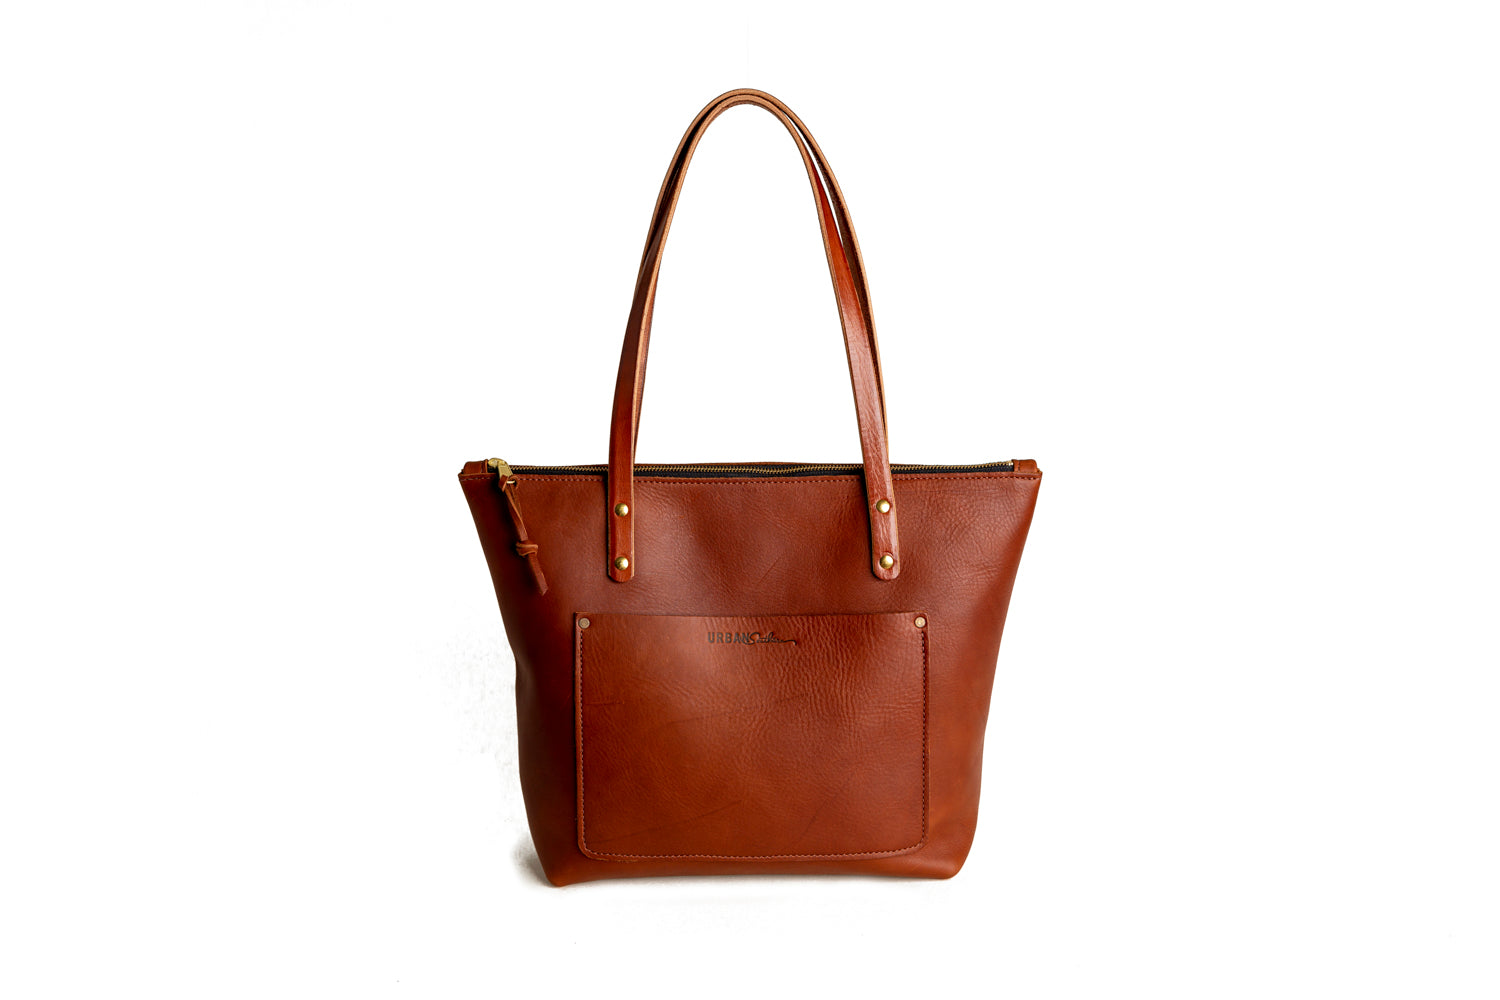 Women's Tote Bags, Tote Bags With Zip